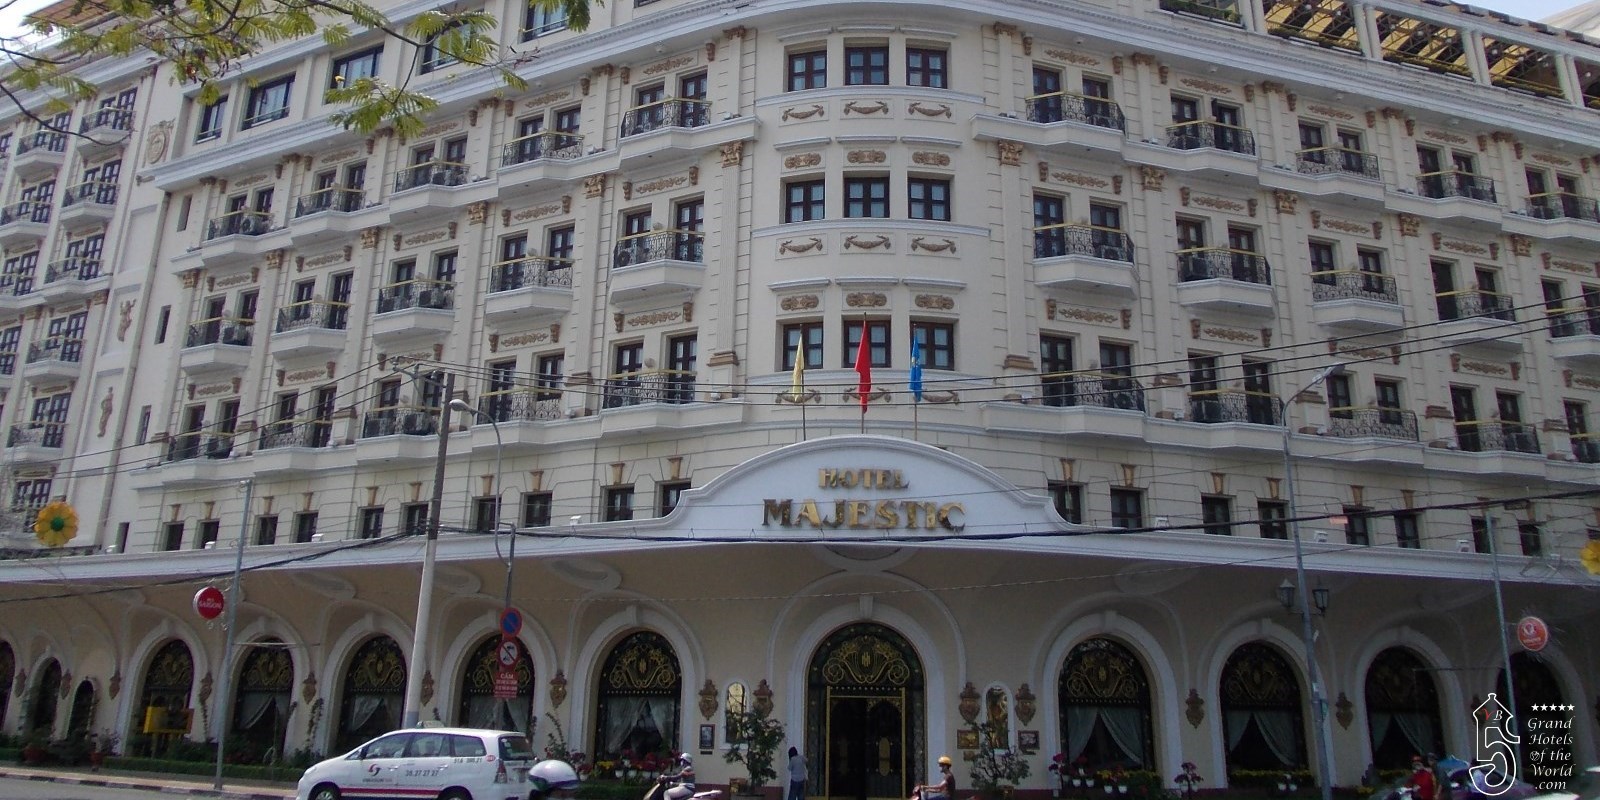 Hotel Majestic in Ho Chi Minh